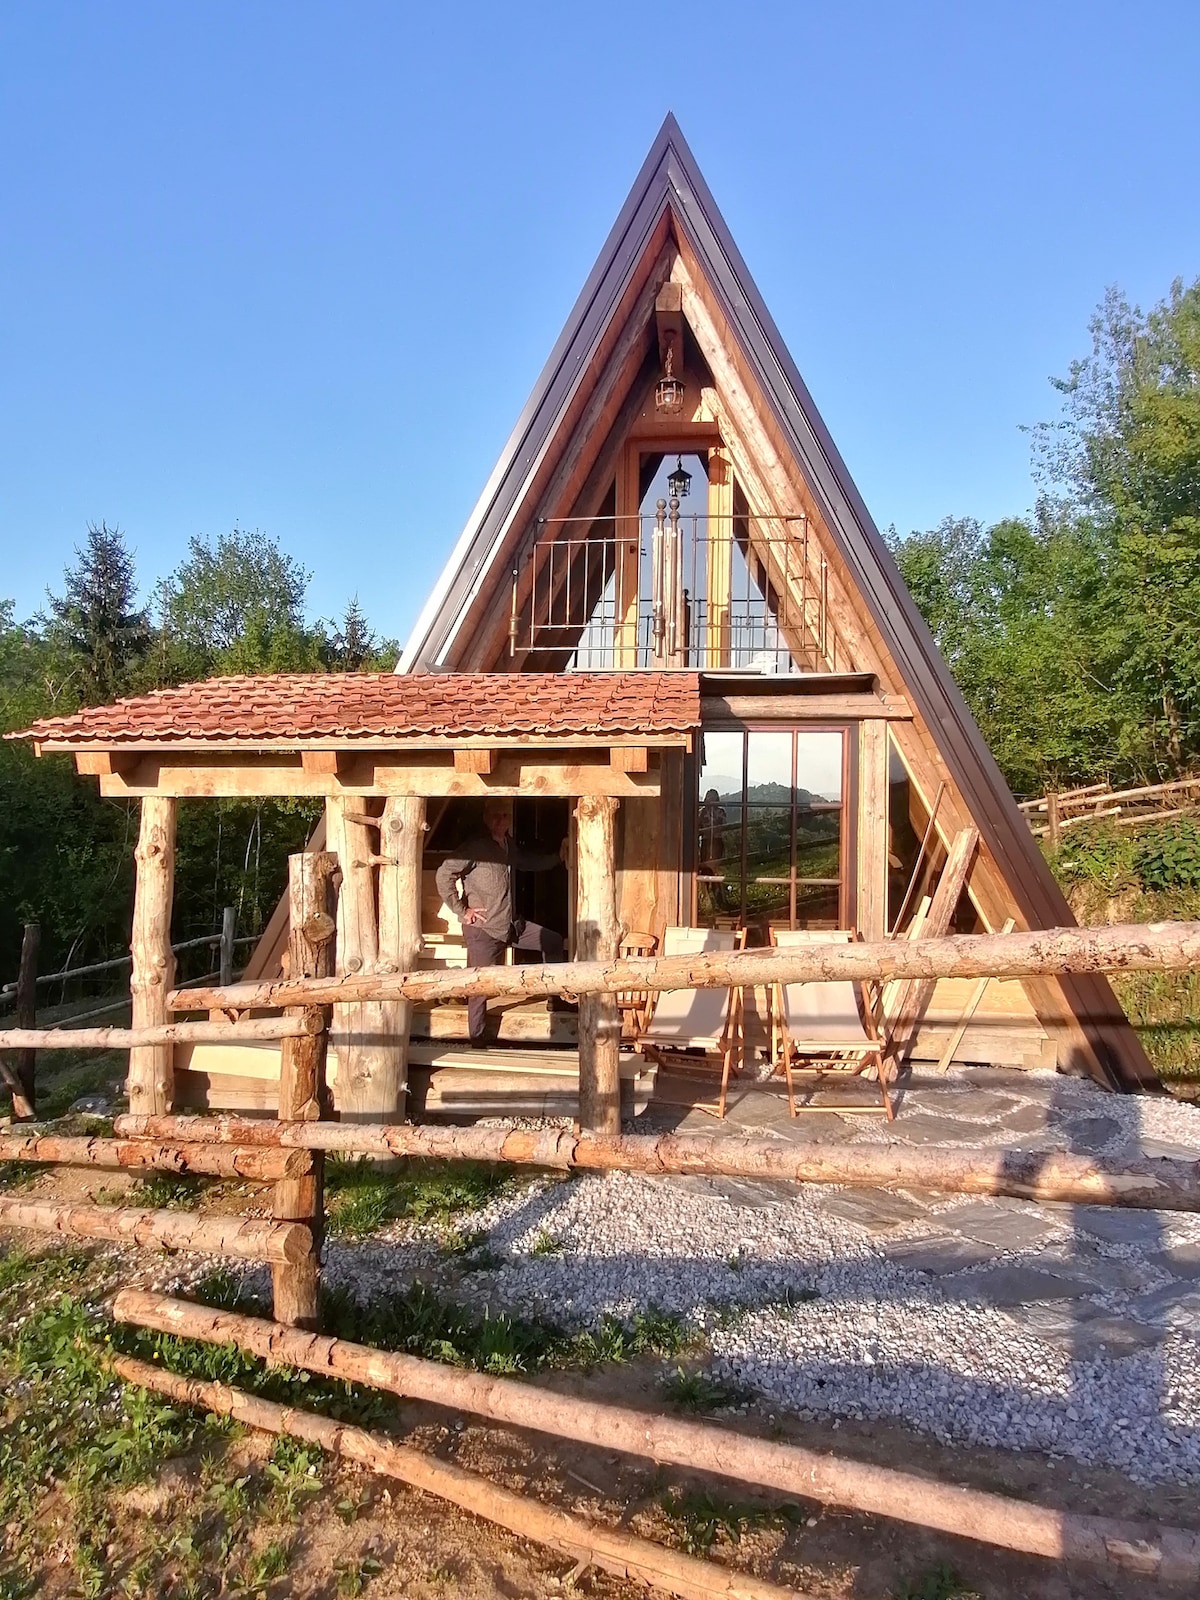 Ranch at Geti – New wooden house for 4 people